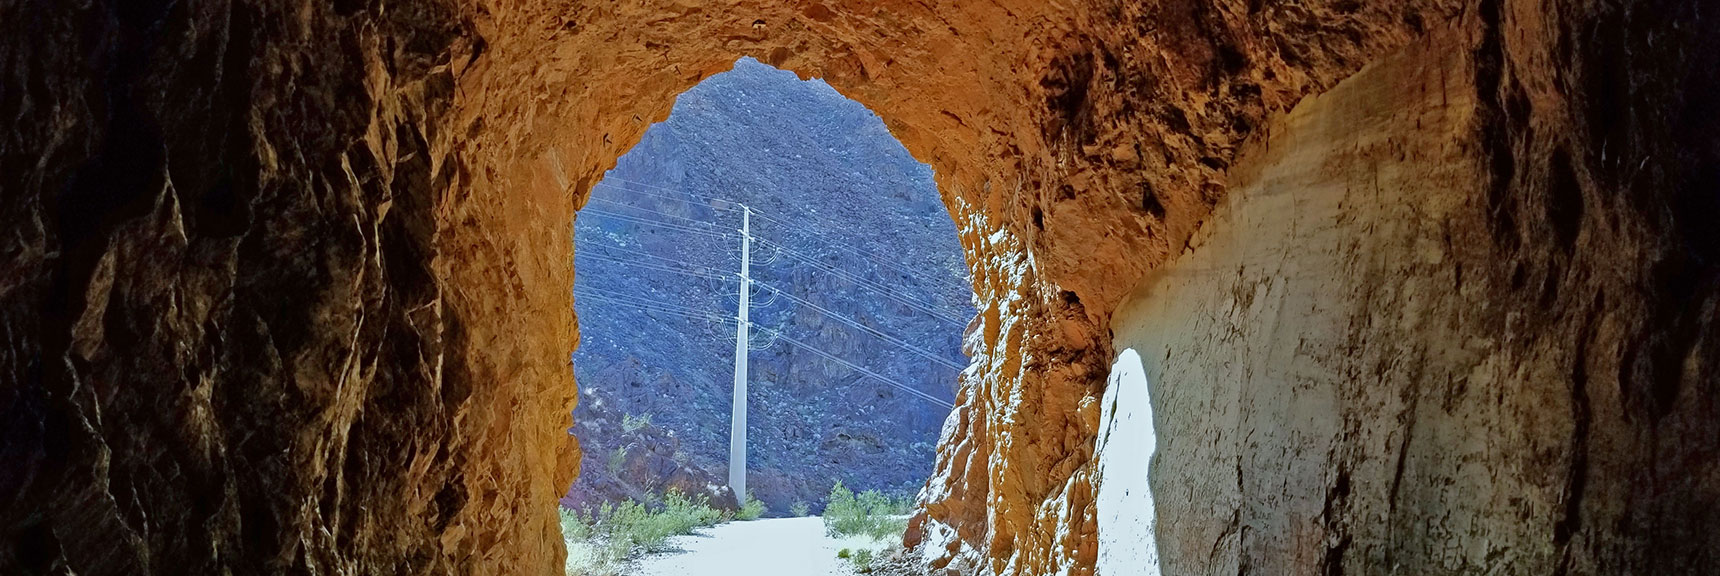 View of the Carved Rock Inside a Railroad Tunnel | Historic Railroad Trail | Lake Mead National Recreation Area, Nevada